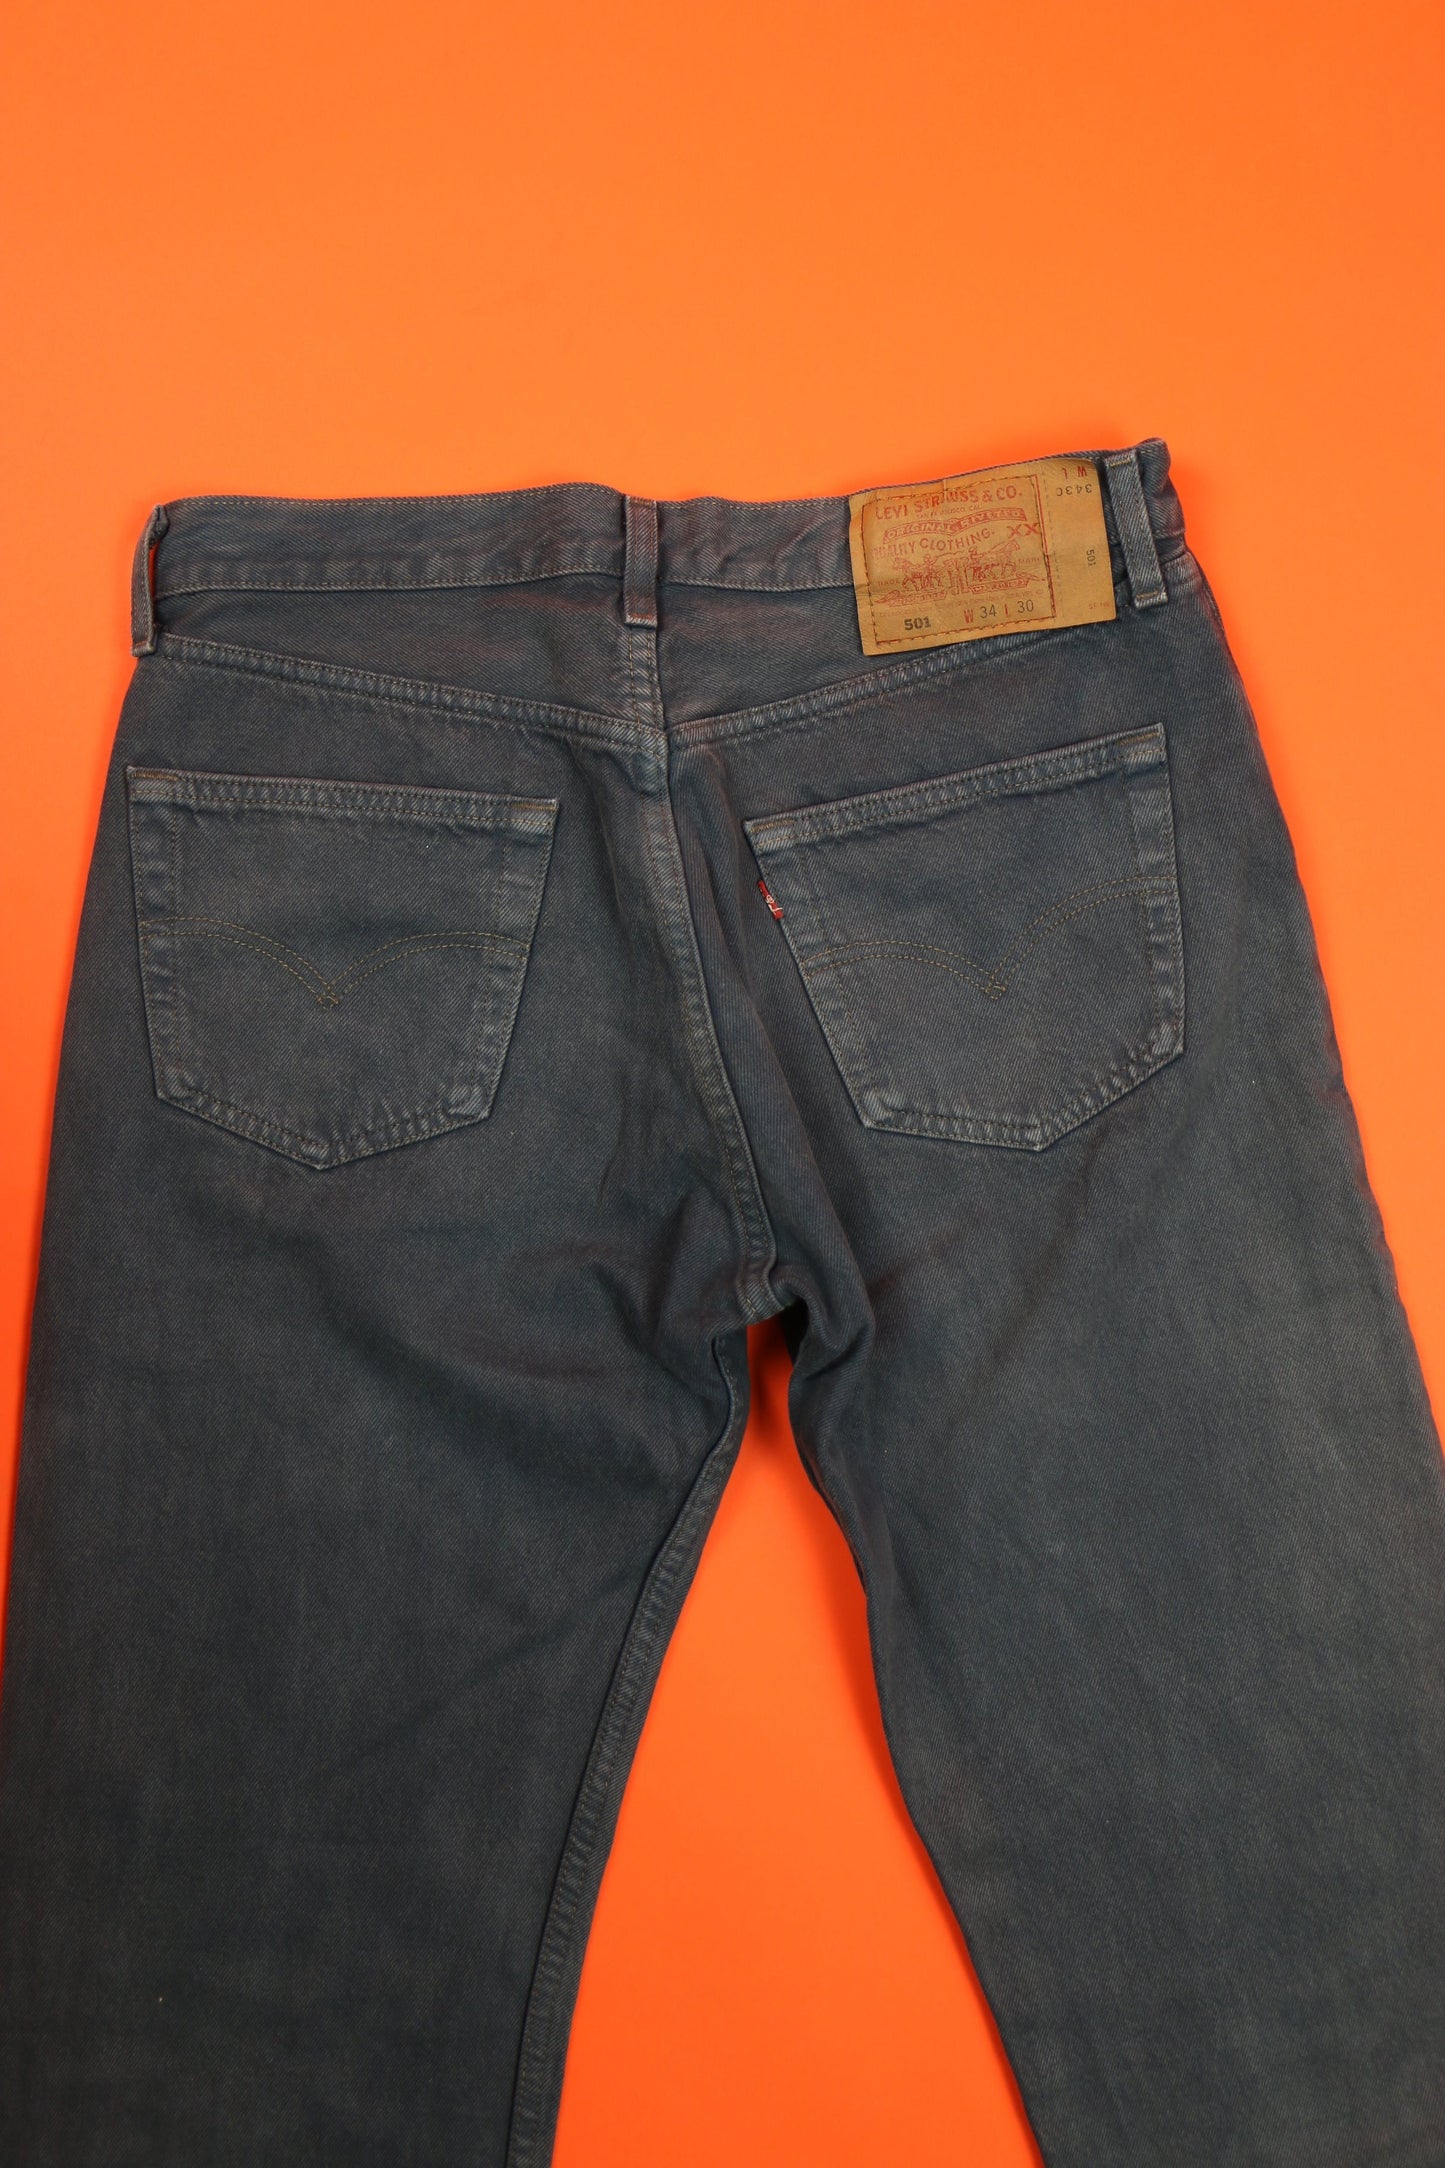 Levi's 501 Jeans Made in U.S.A. 'W34 L30' - vintage clothing clochard92.com